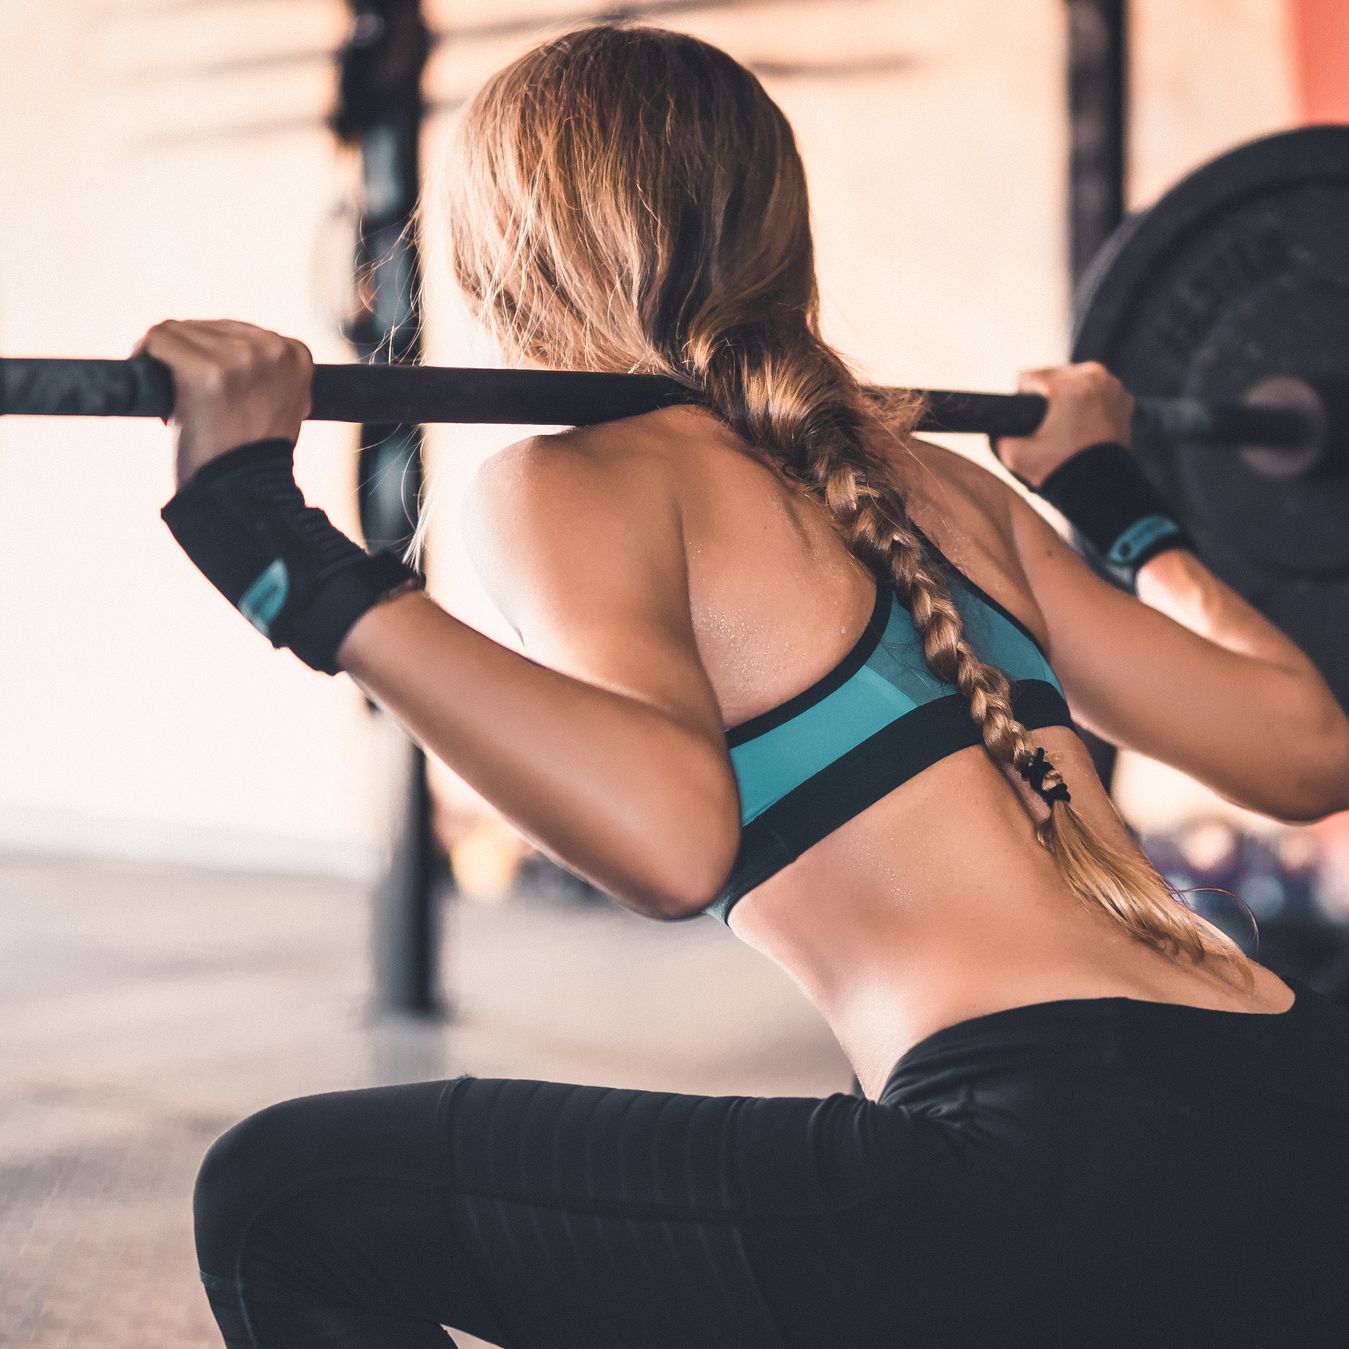 https://hips.hearstapps.com/hmg-prod/images/rear-view-of-woman-lifting-weights-in-gym-royalty-free-image-1573129358.jpg?crop=0.680xw:0.893xh;0.168xw,0.0179xh&resize=2048:*